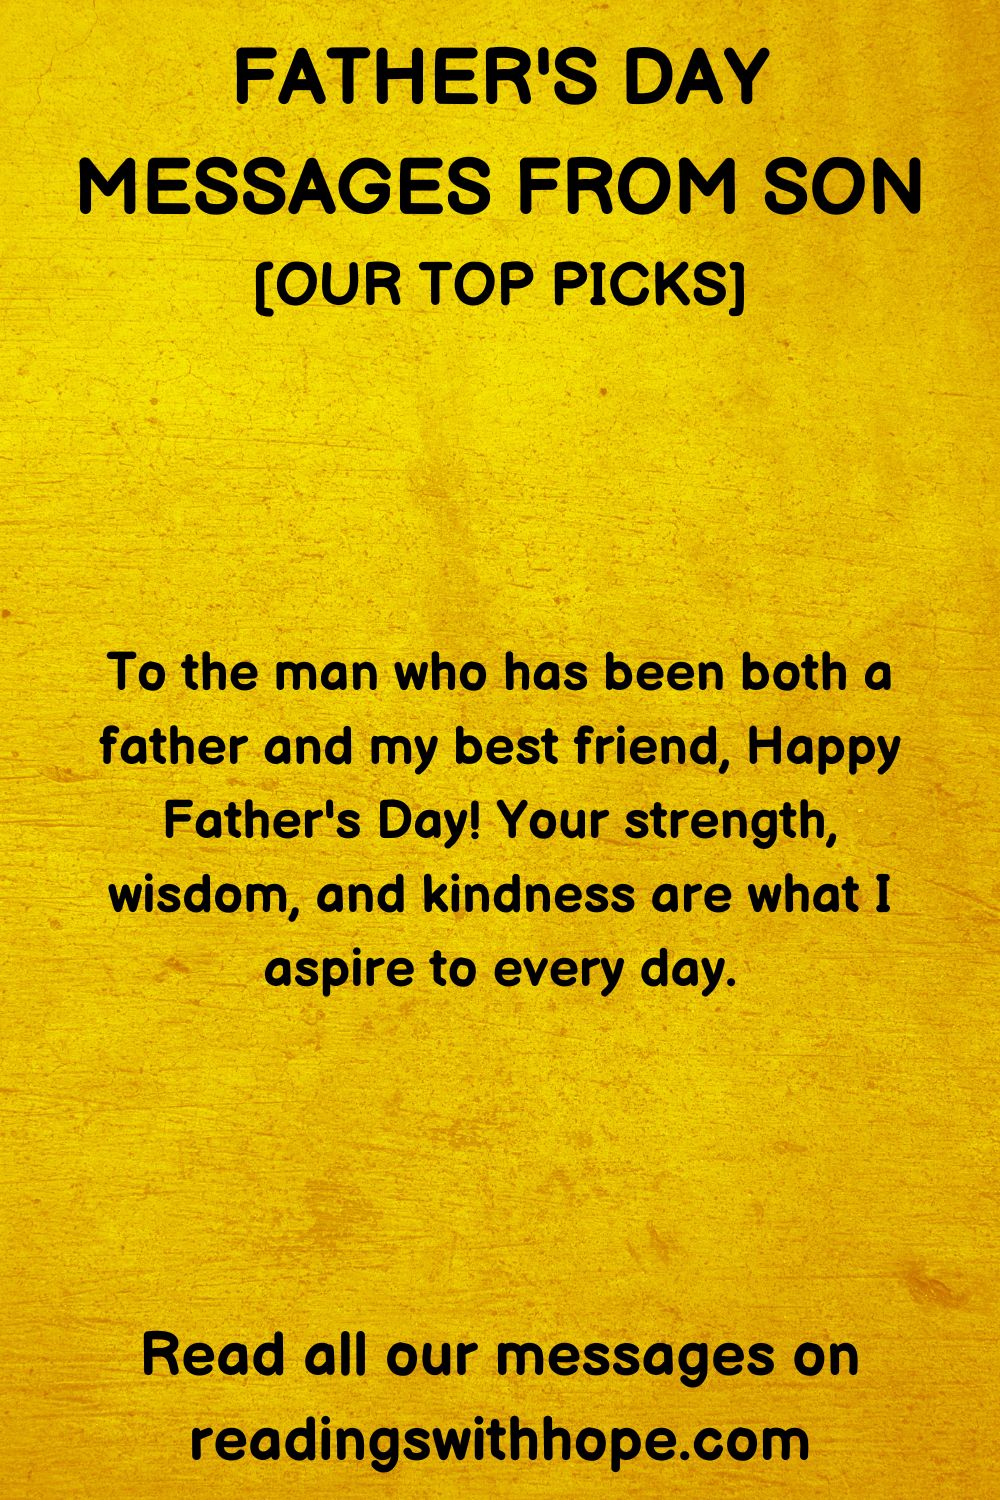 48 Father's Day Messages From Son